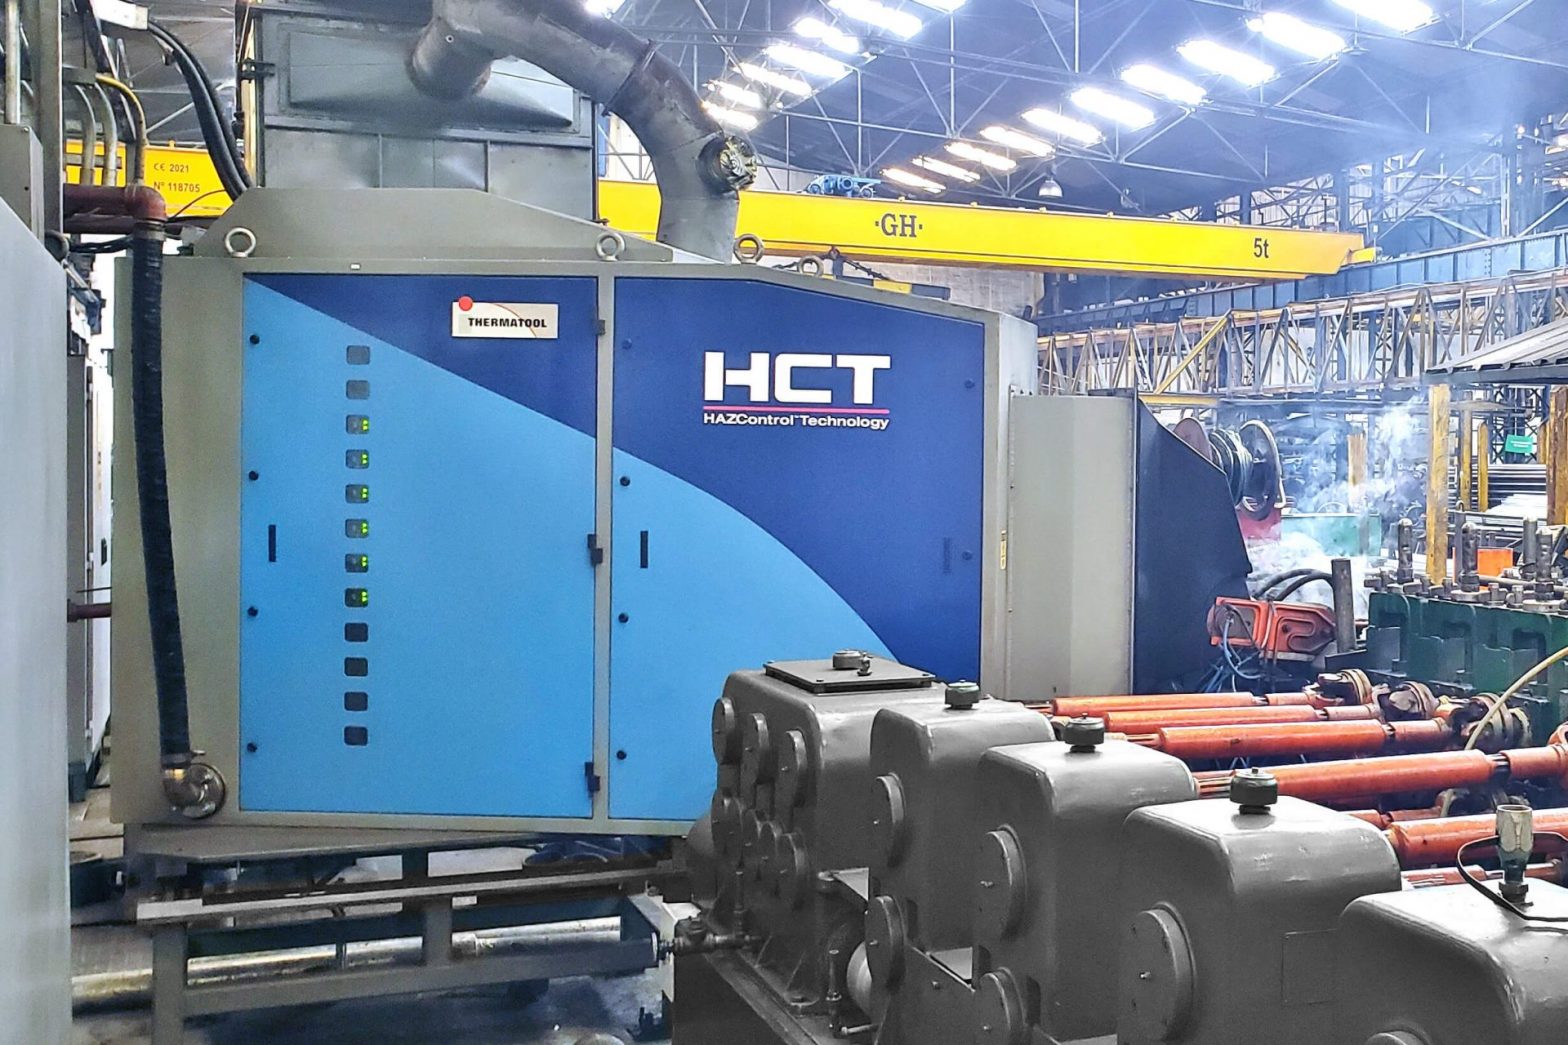 Thermatool HAZControl™ Technology 300 kW High Frequency Welder